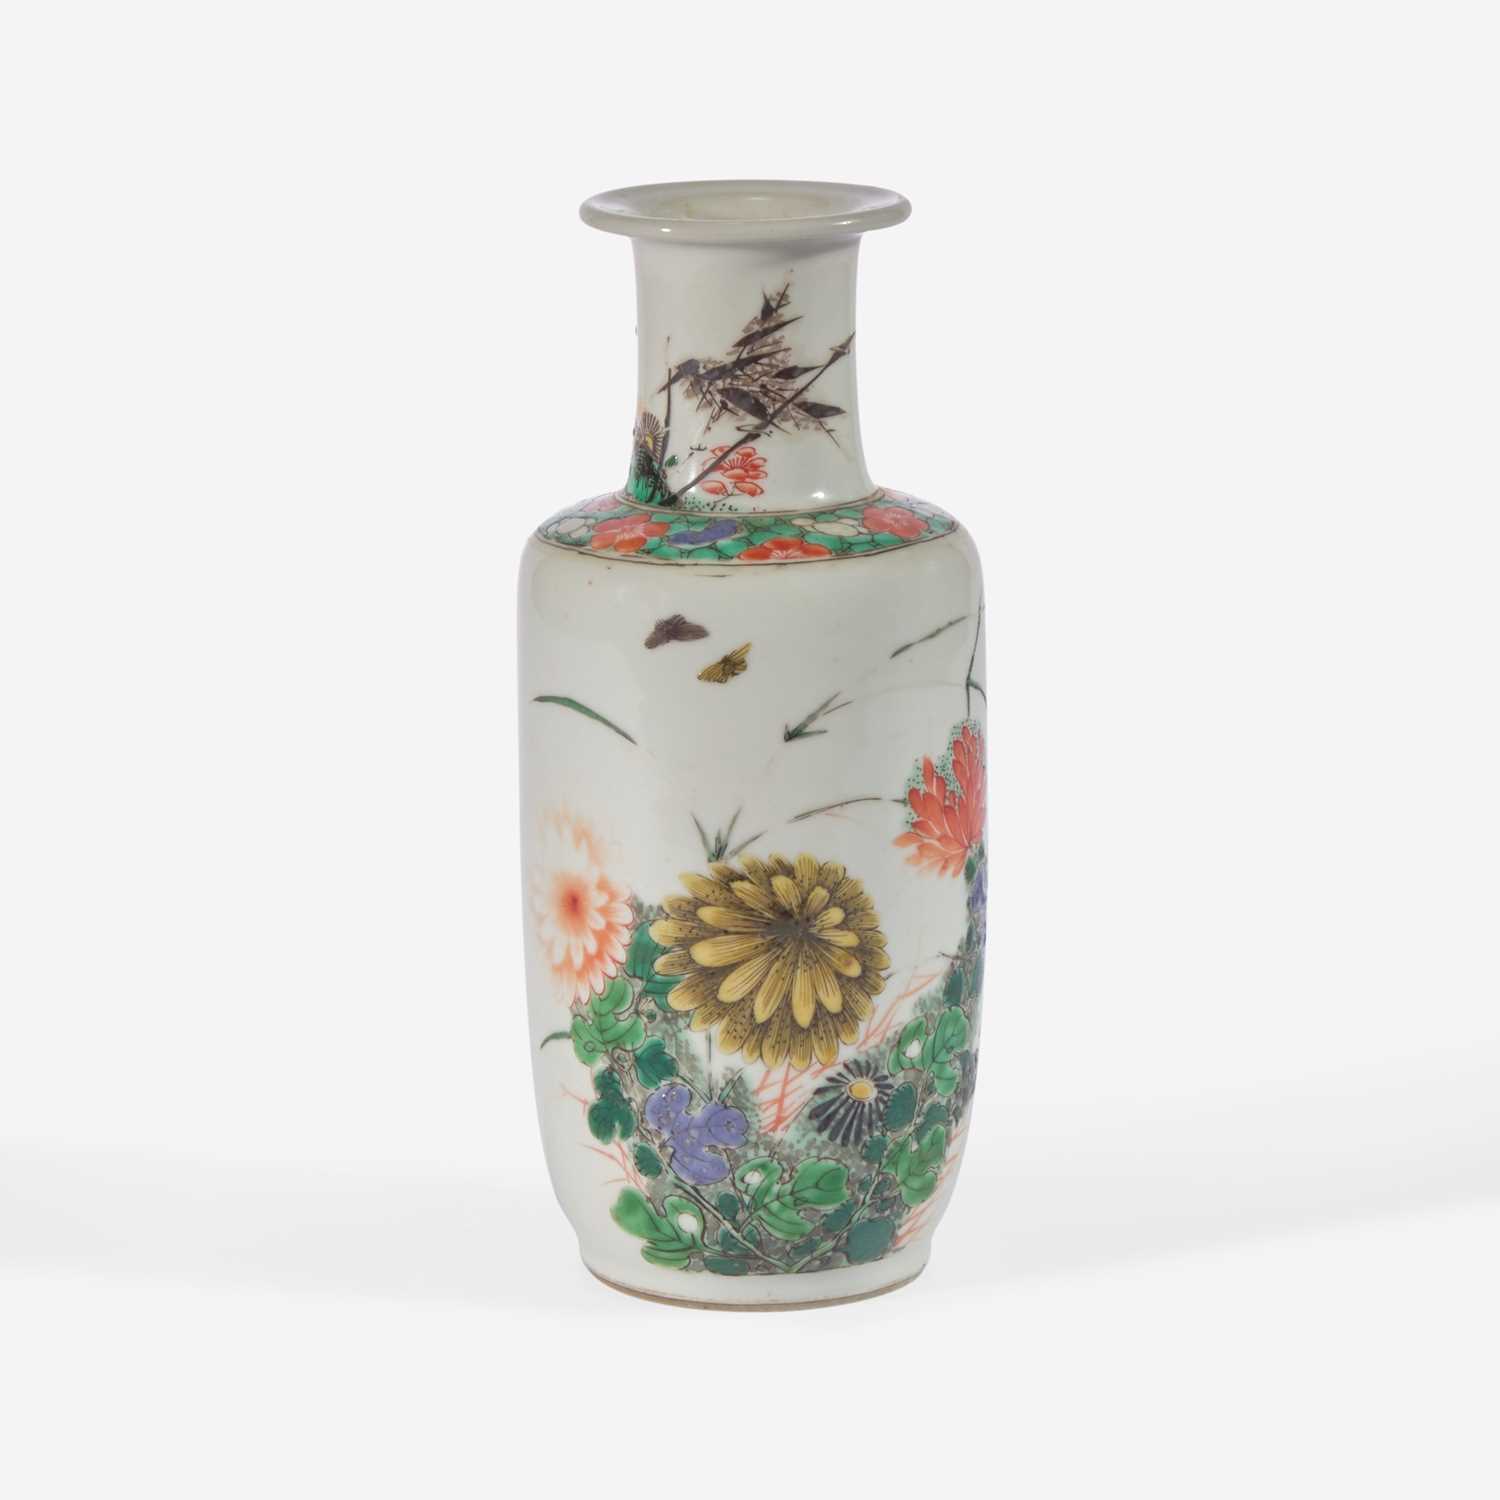 Lot 12 - A small Chinese famille verte-decorated porcelain rouleau vase 五彩纸槌瓶